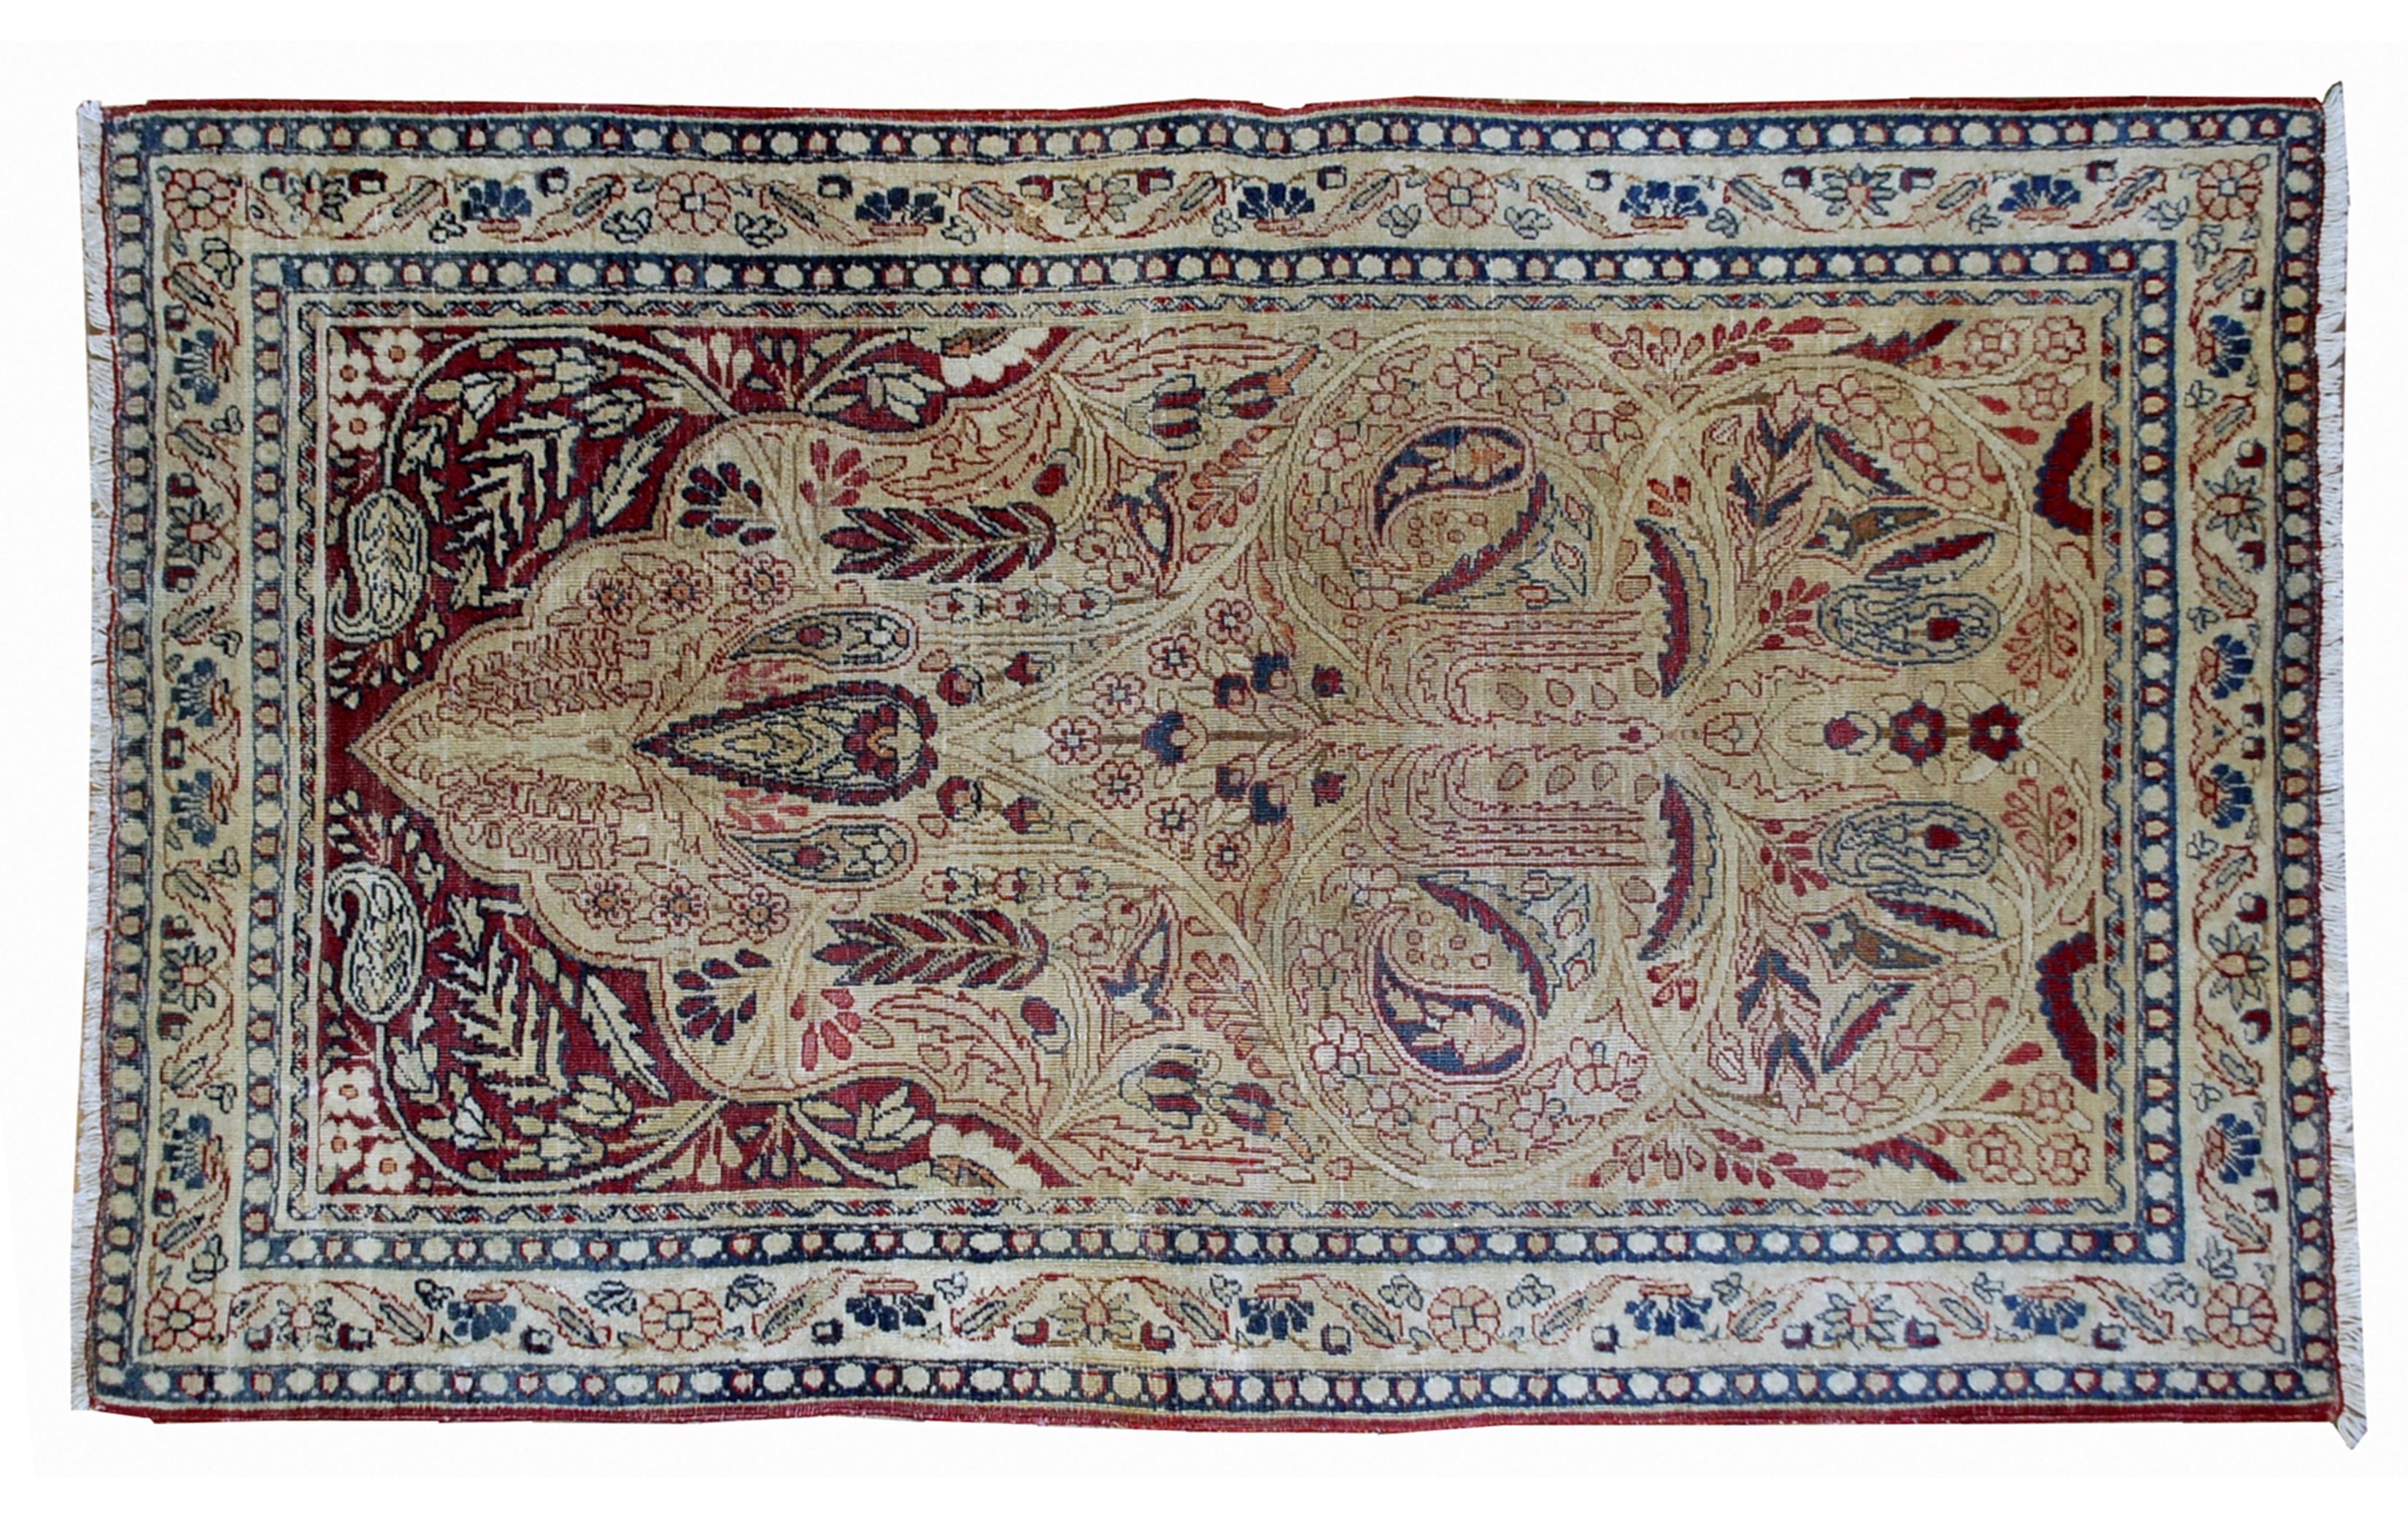 Kerman Lavar style rug in original condition, it has some low pile. The rug is prayer in beige and burgundy shades, made in the end of 19th century.

-condition: Original, some low pile,

-circa 1880s,

-size: 2.10' x 4.8' (90cm x